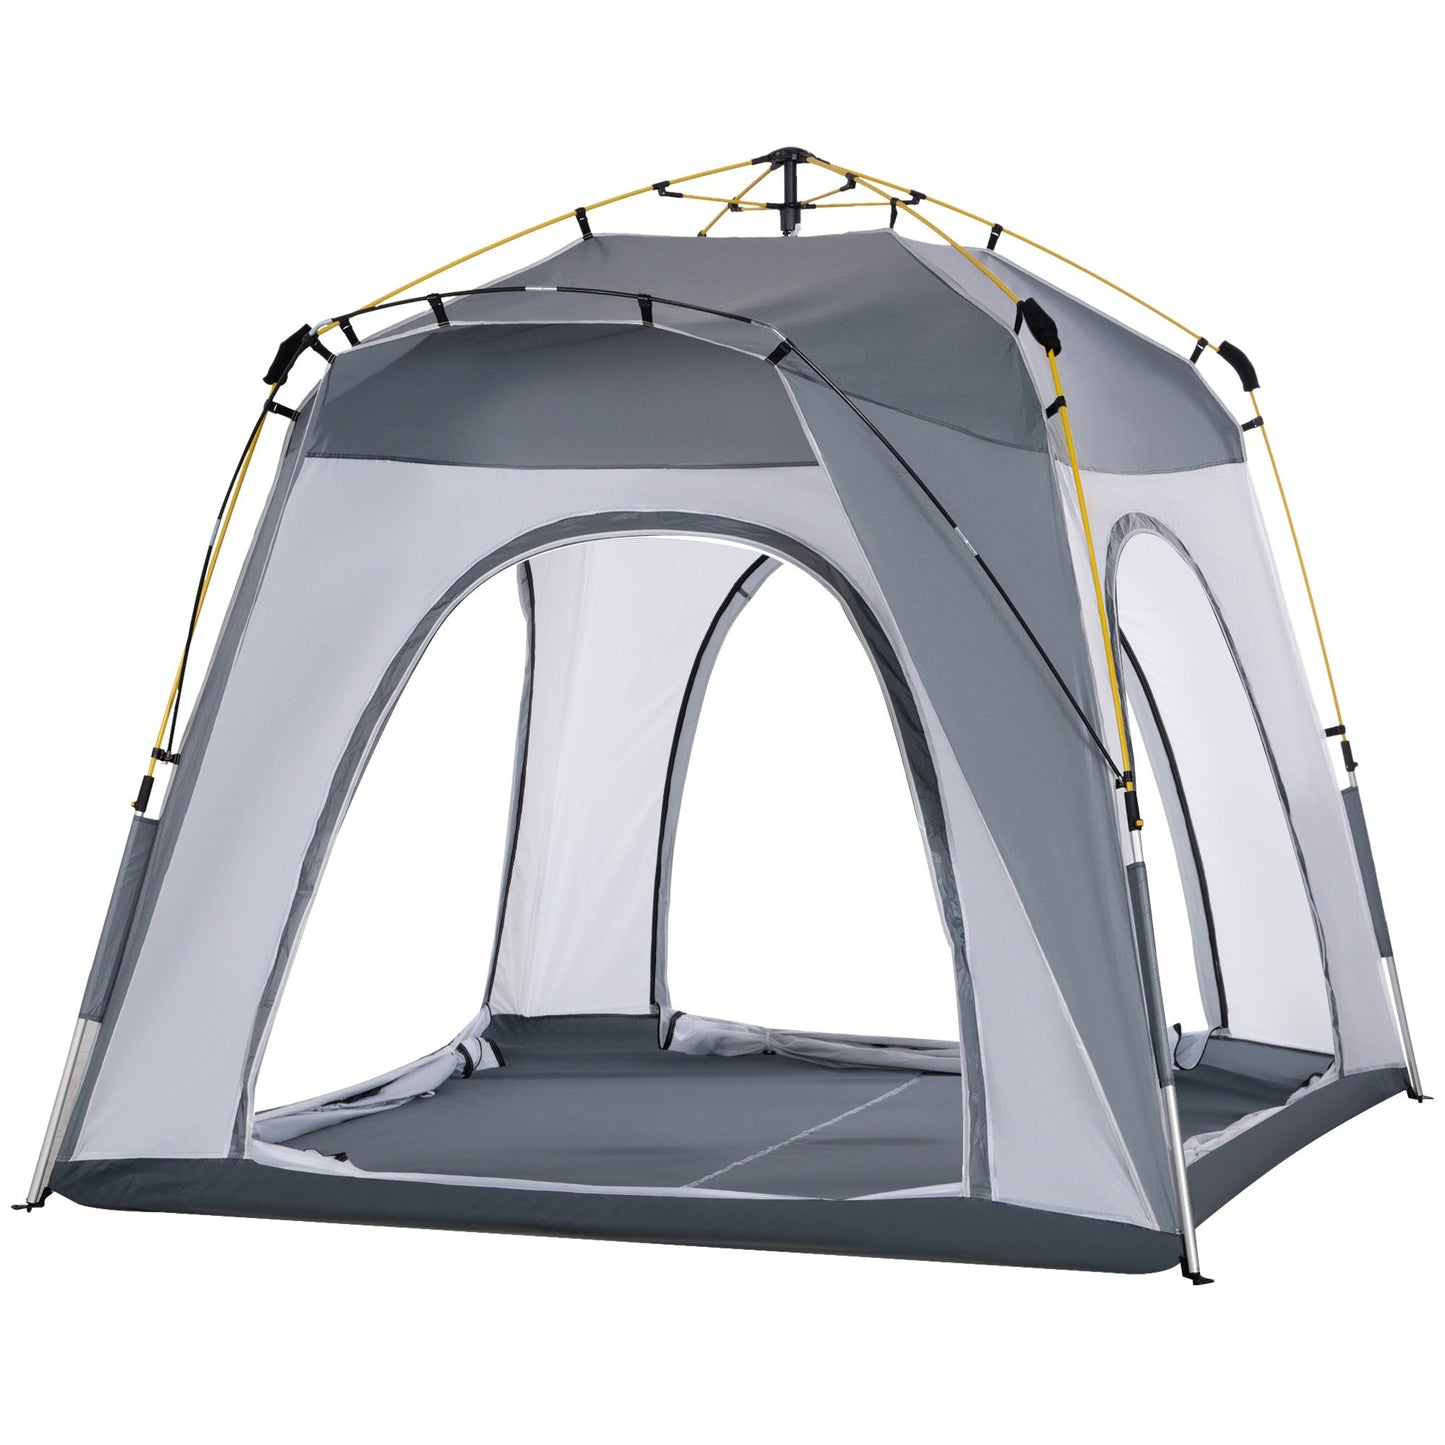 -Outsunny 4 Person Pop Up Camping Tent Quick Setup Automatic Hydraulic Family Travel Tent w/ Windows Doors Carry Bag, Gray - Outdoor Style Company